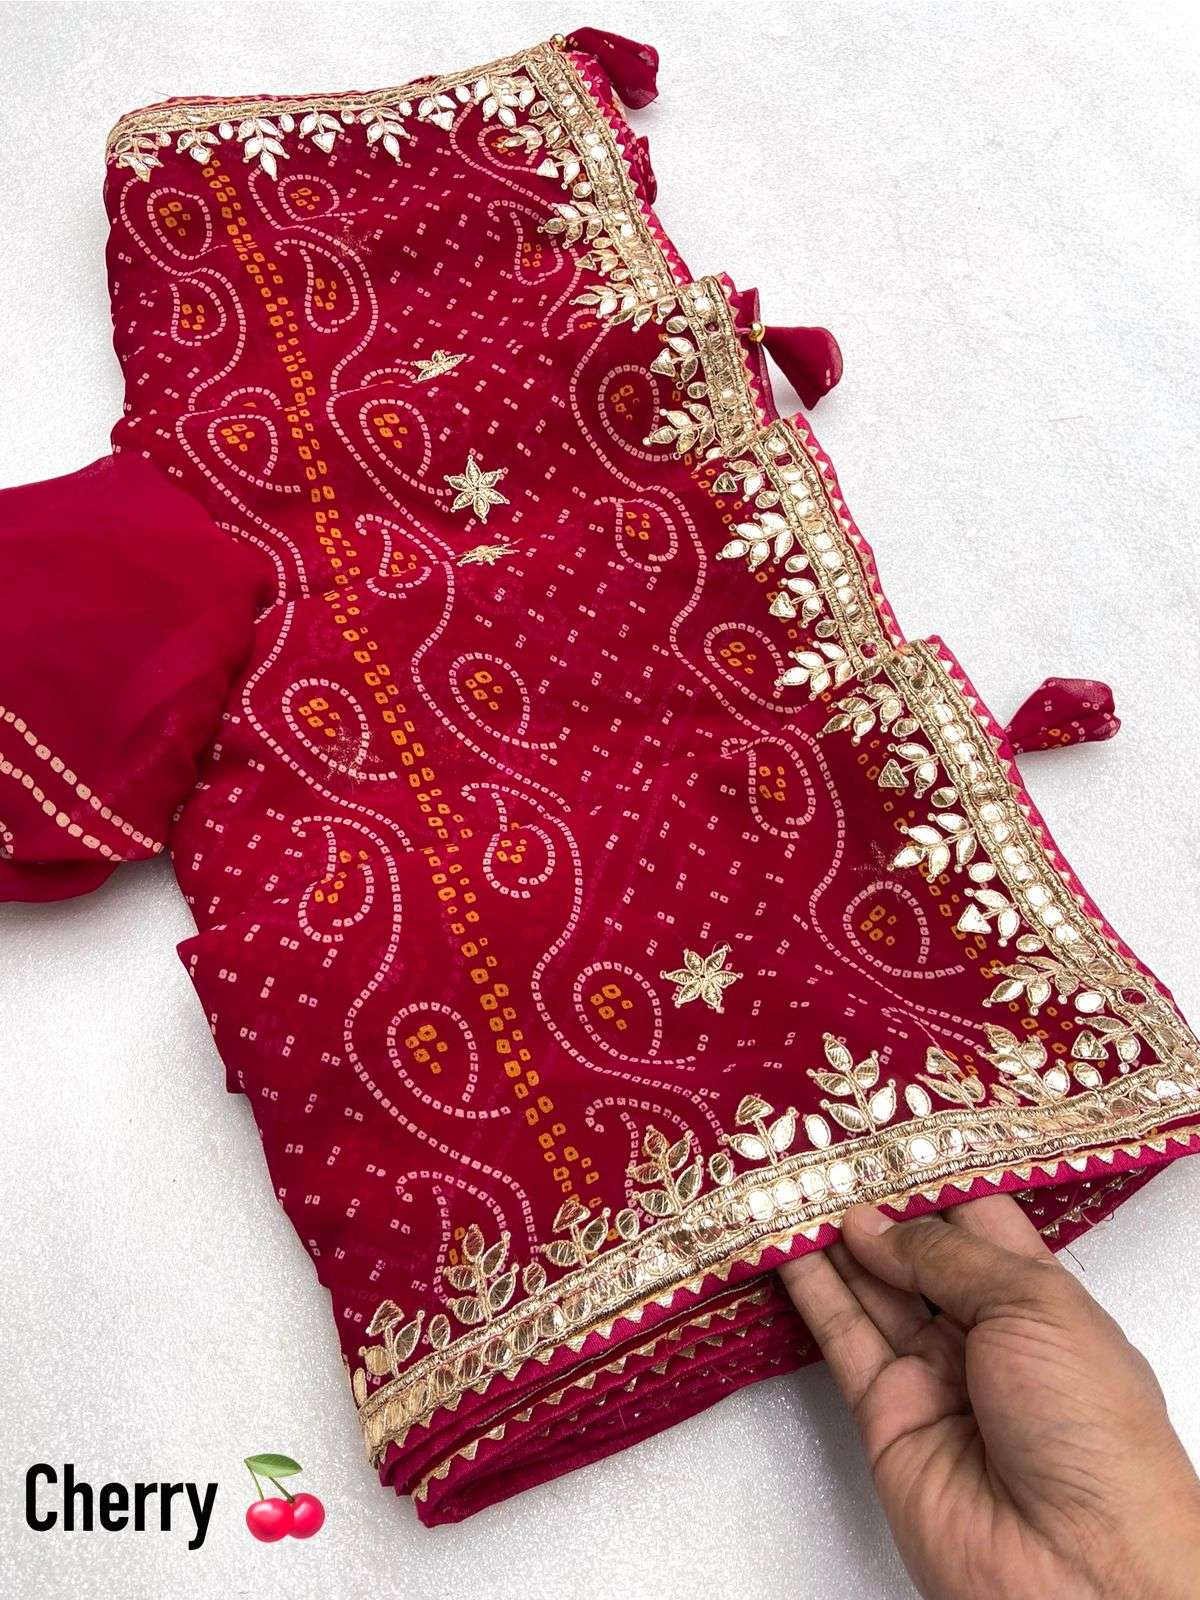 saree fabric n details soft peding georgette bandhej saree with c pallu gotapatti work in whole saree nd rich look butti with latkan blouse running blouse unstitched 4 ultimate colour available